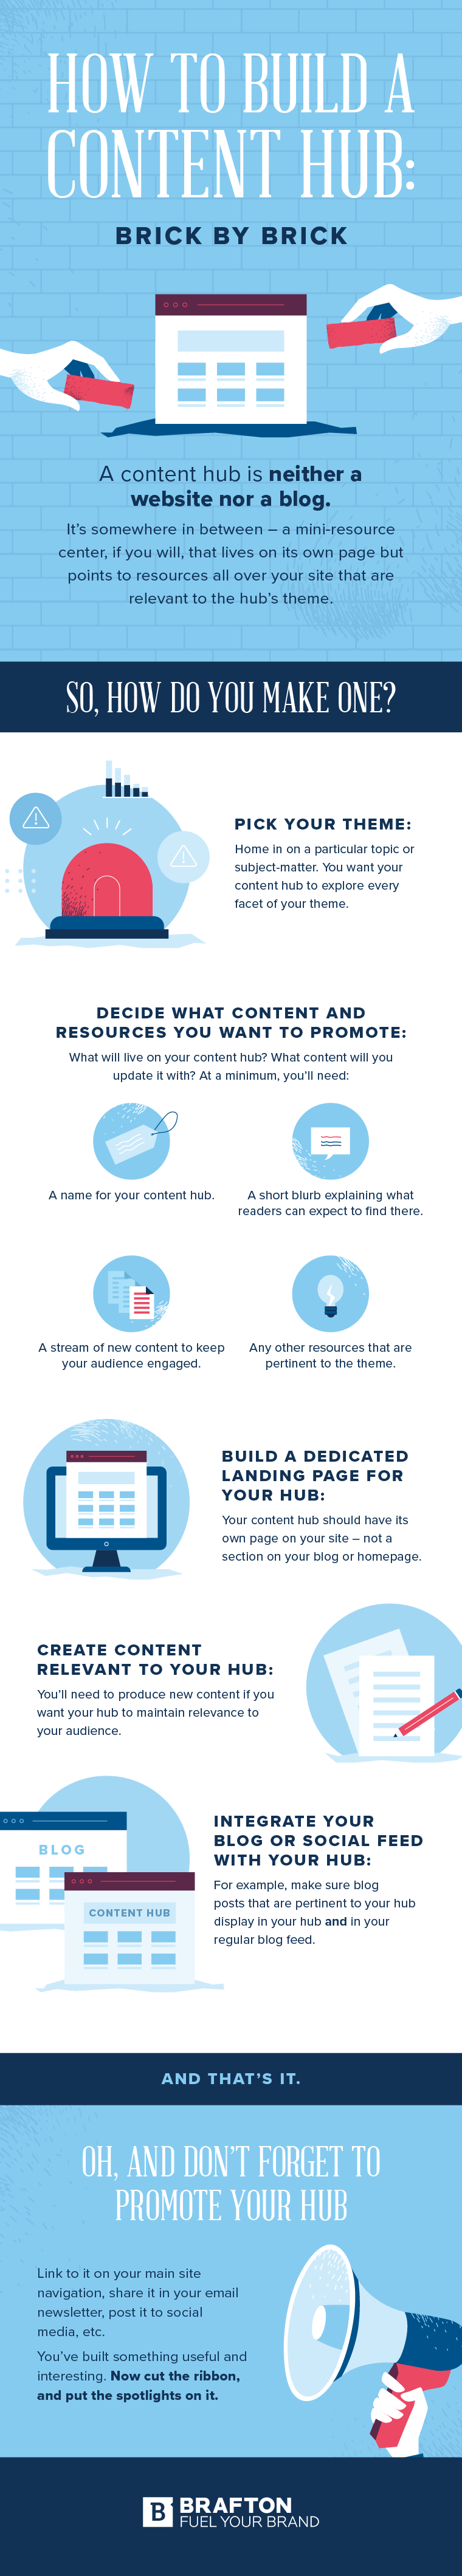 How to build a content hub Infographic